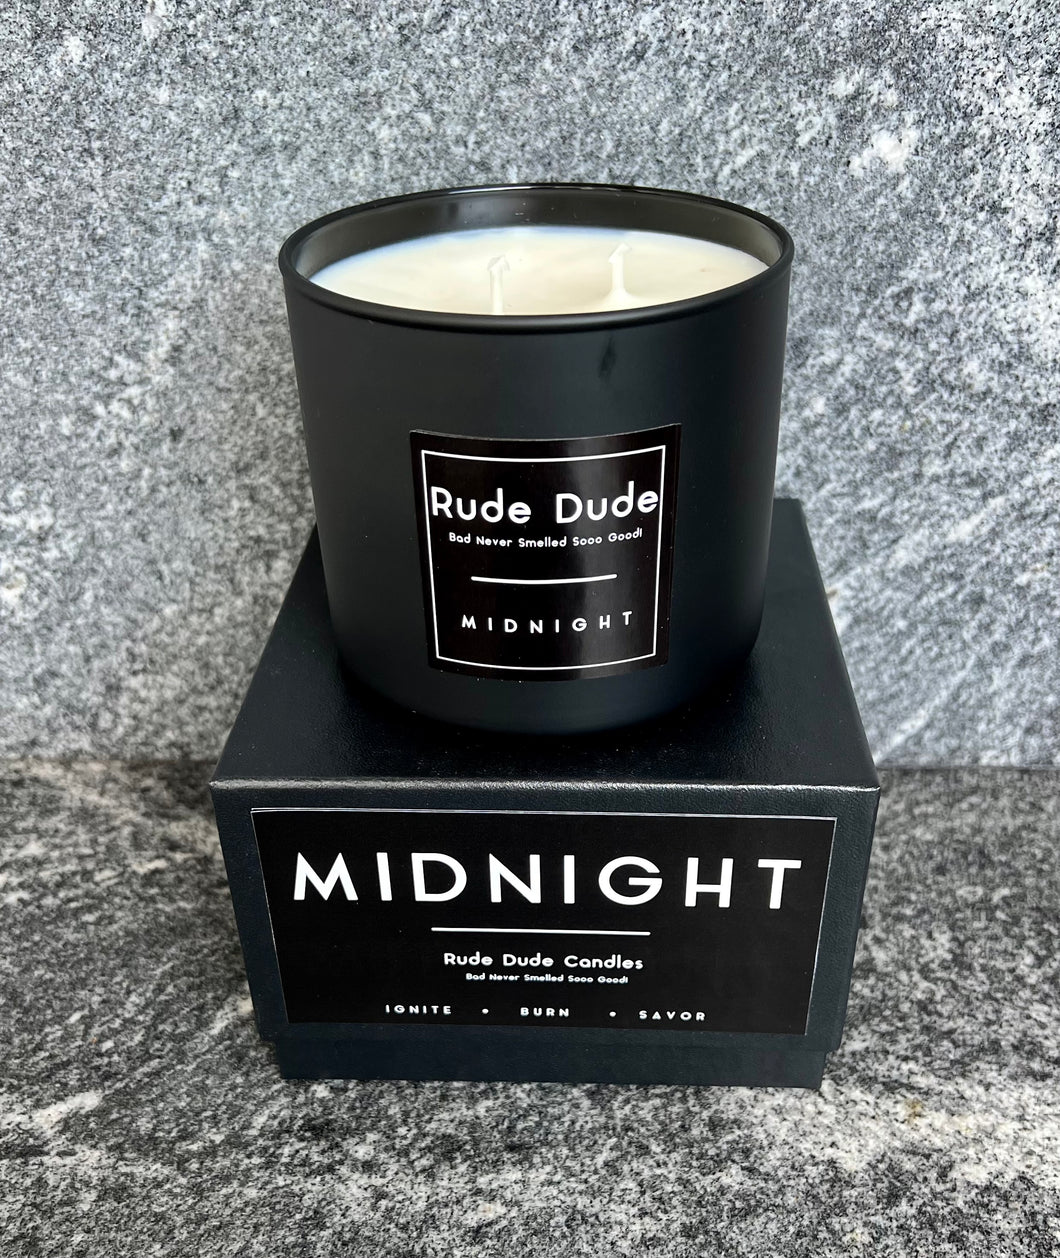 Rude Dude MIDNIGHT - Candle 18 oz - 512 g